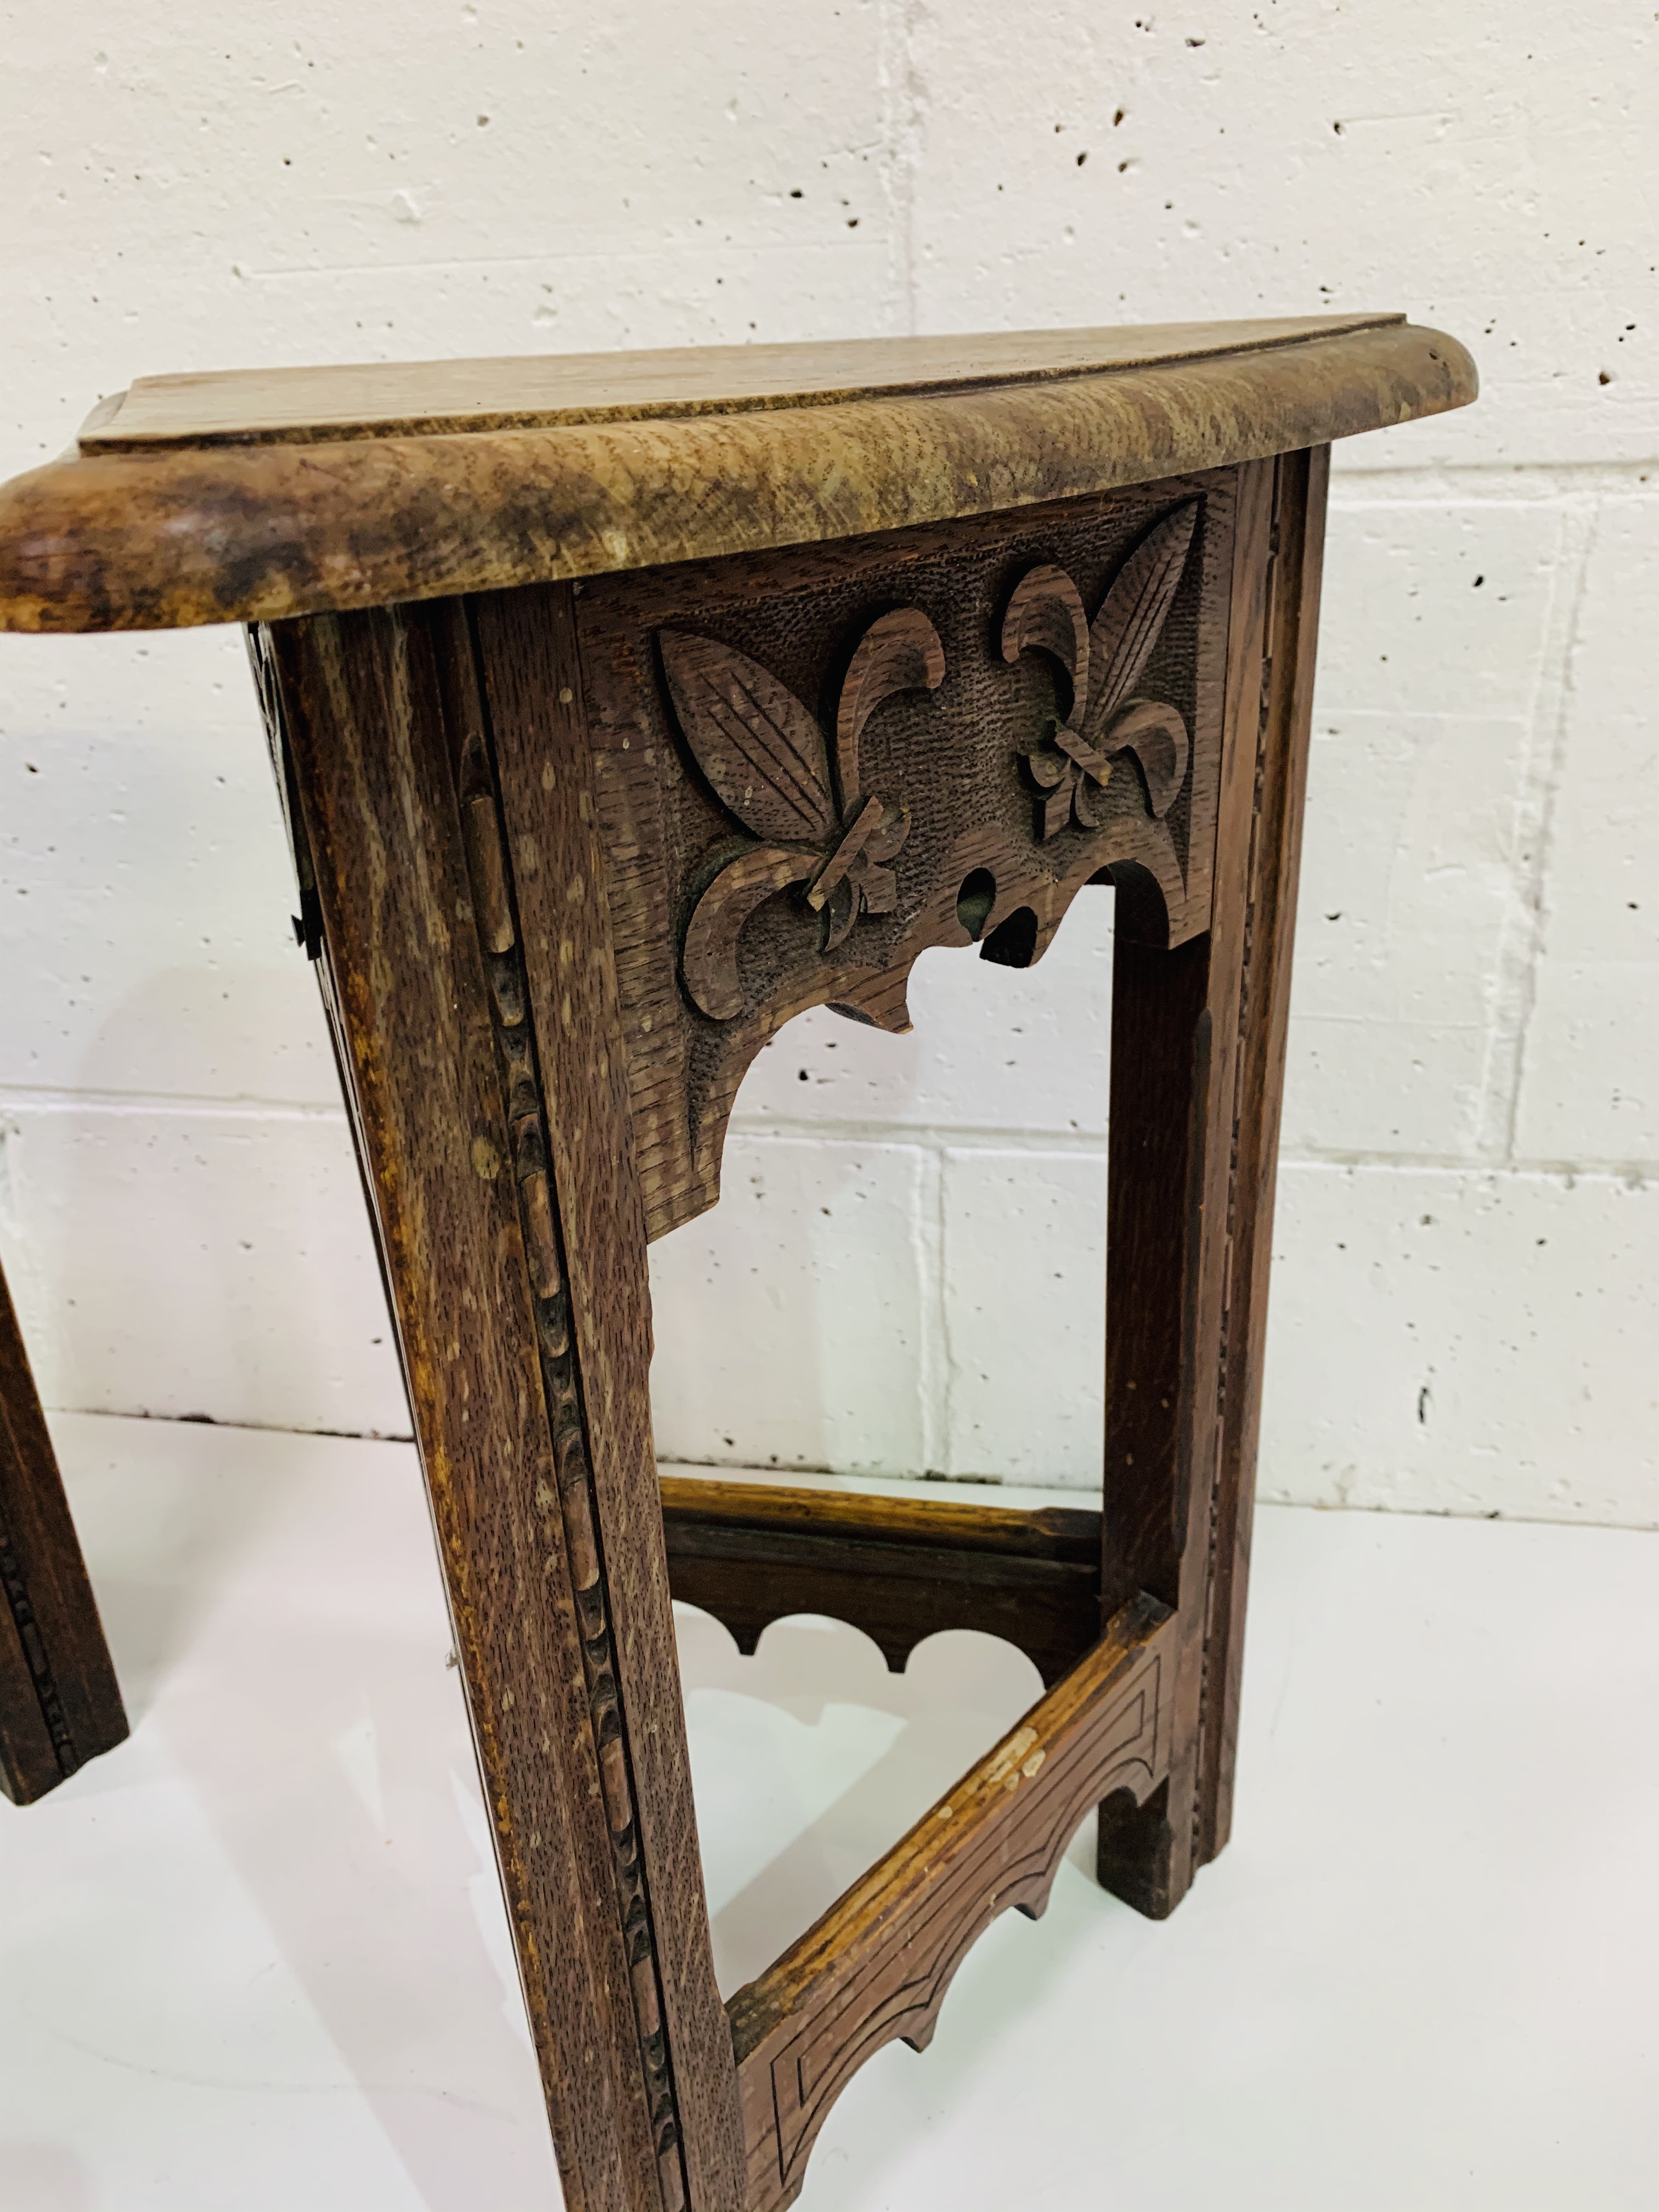 Pair of oak Arts and Crafts triangular stools with lifting lids, carved with fleurs-de-lys. - Image 2 of 4